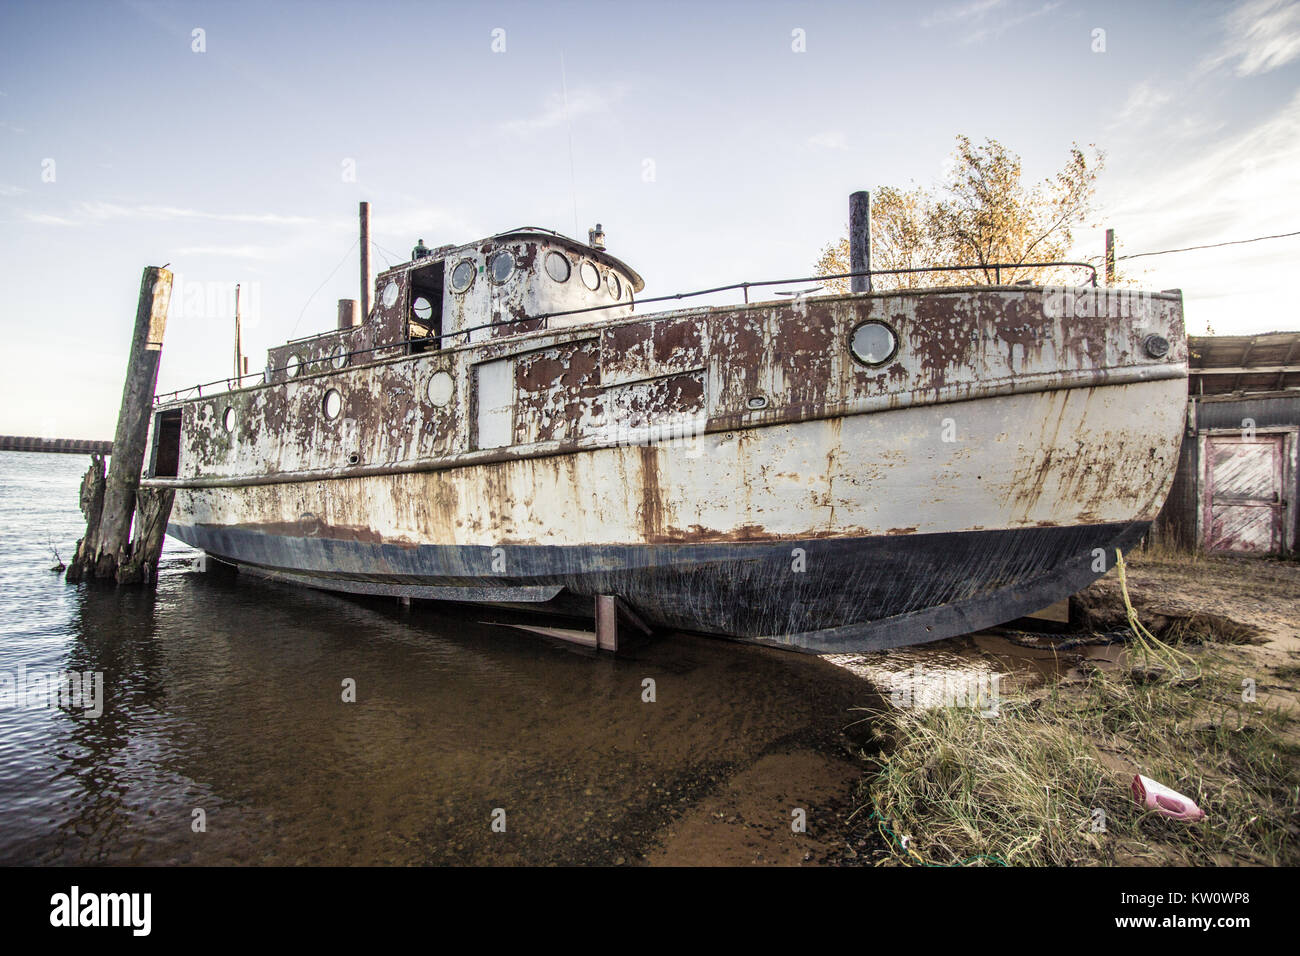 Weathered and worn commercial fishing boat beached on the shores of Lake Superior at the Whitefish Point Harbor in the Upper Peninsula of Michigan. Stock Photo